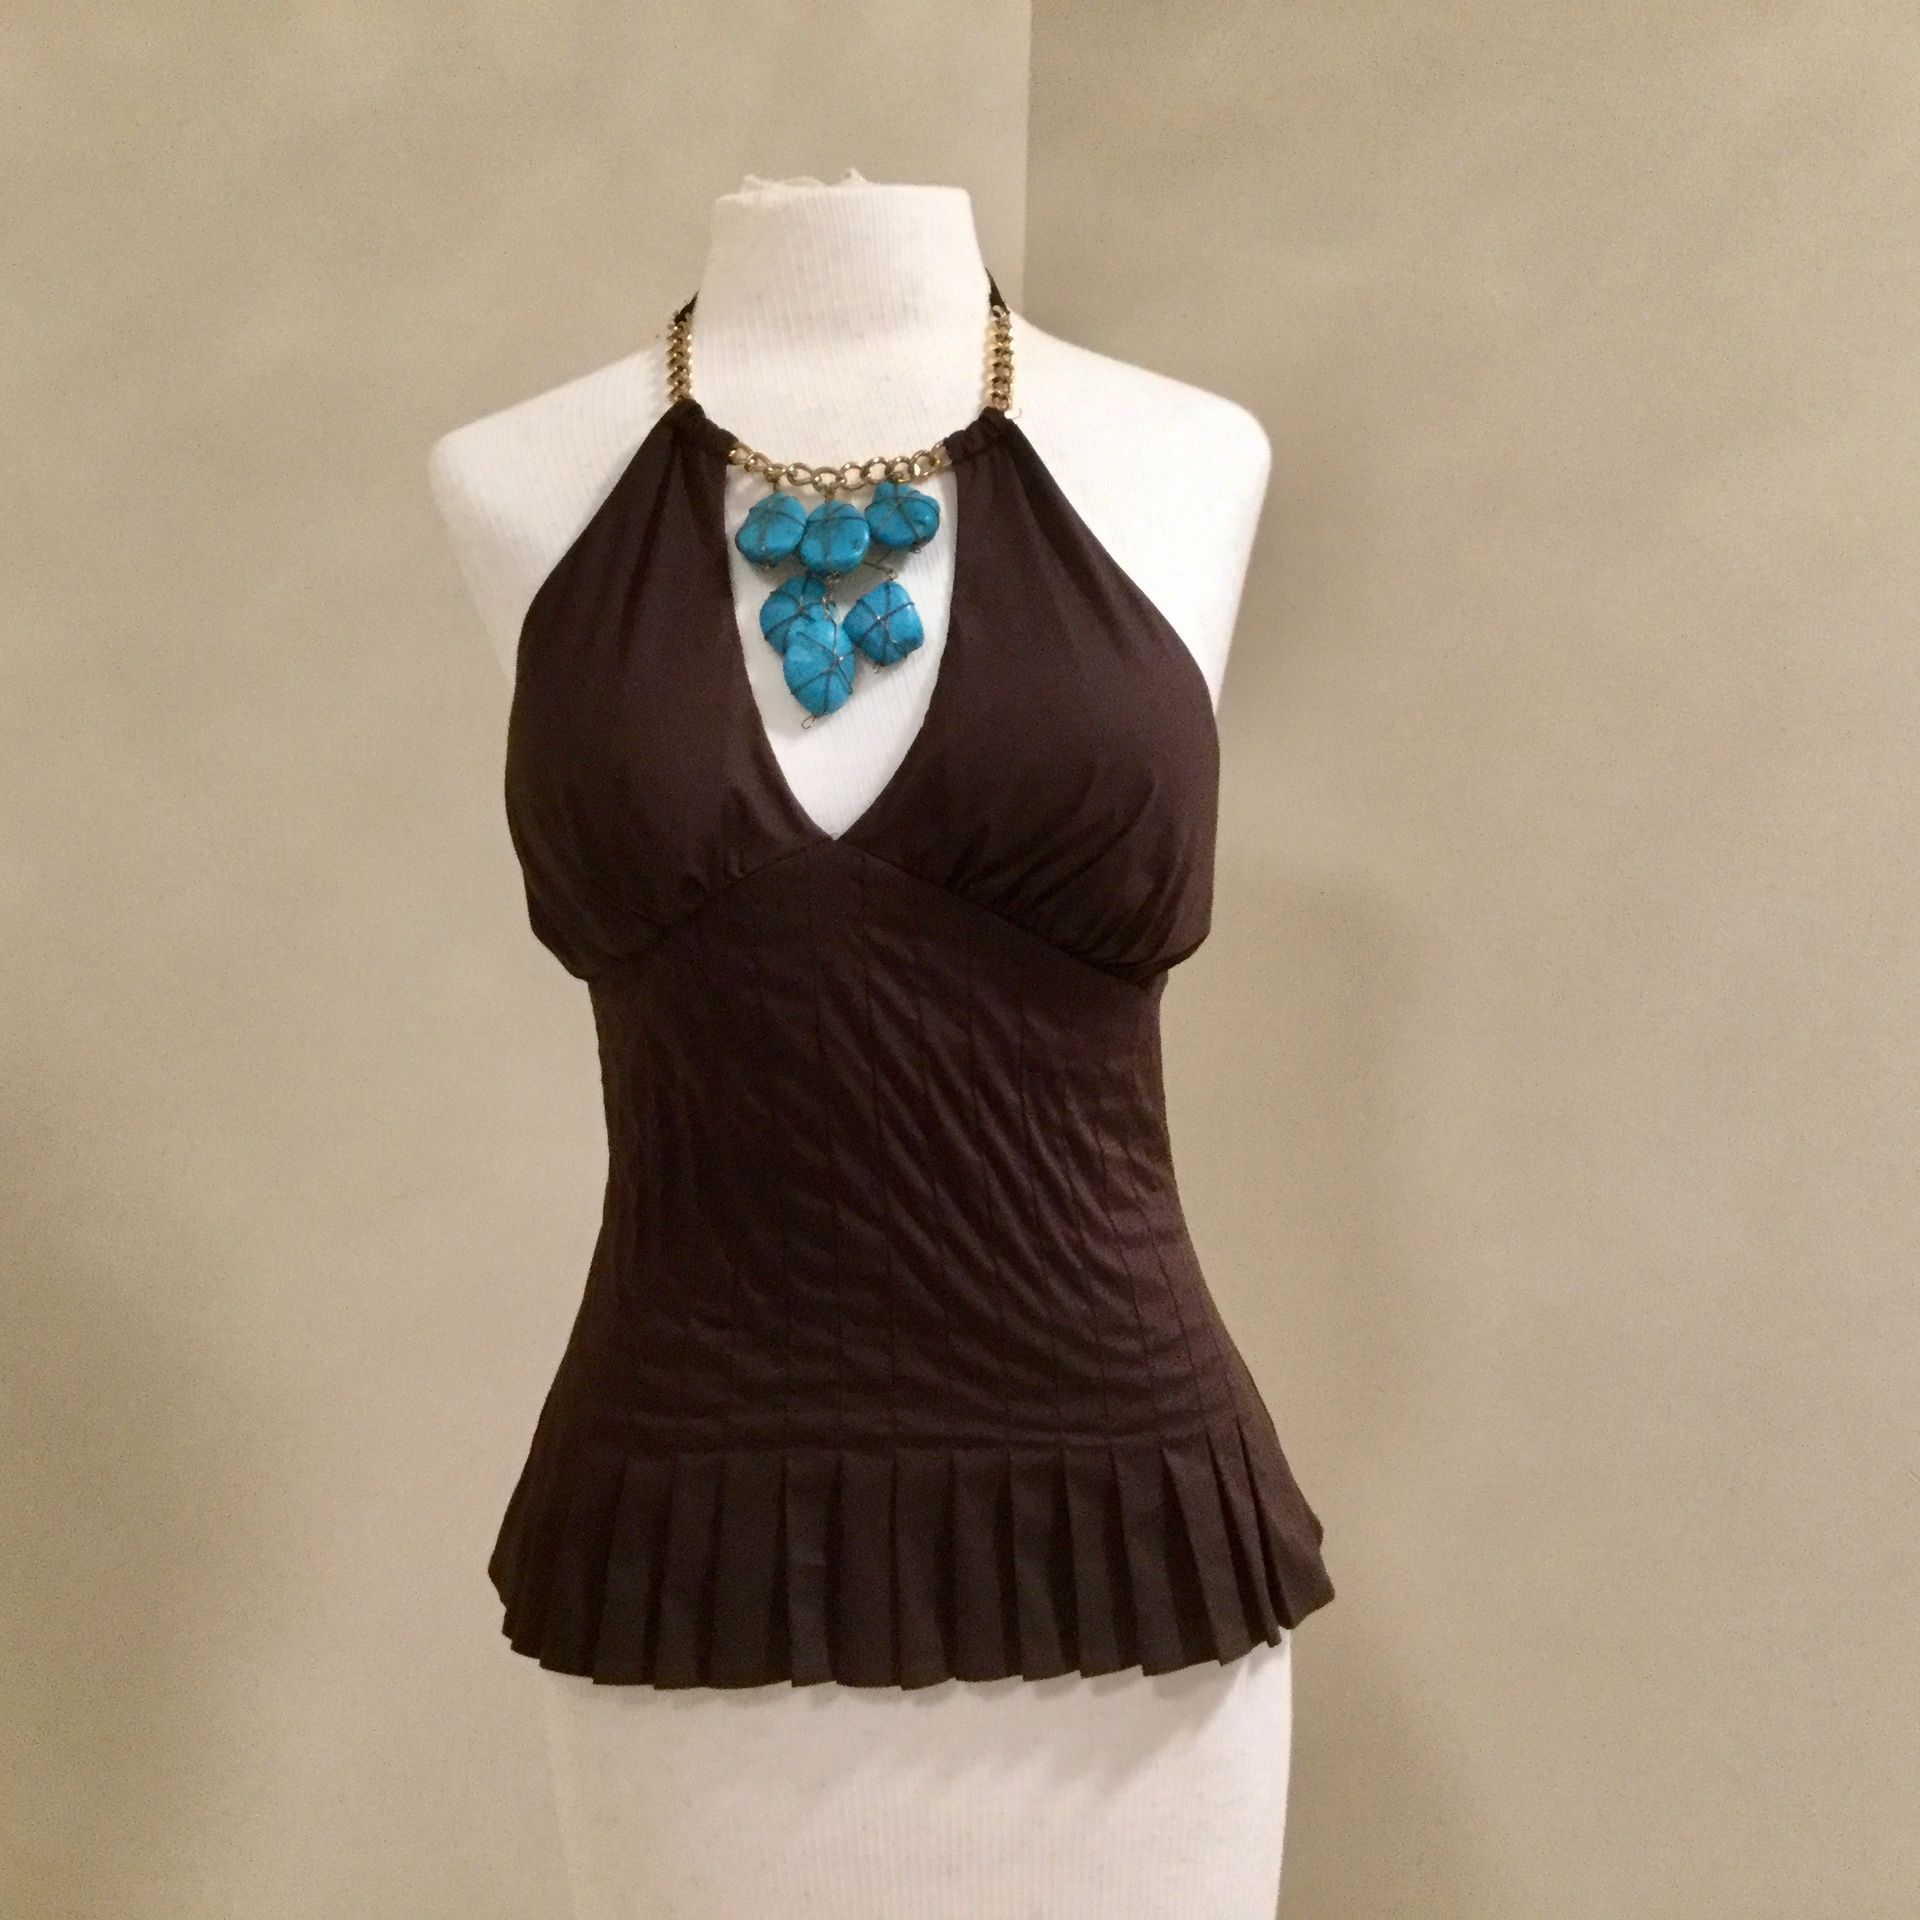 Bebe Brown Halter Top With Blue Accents